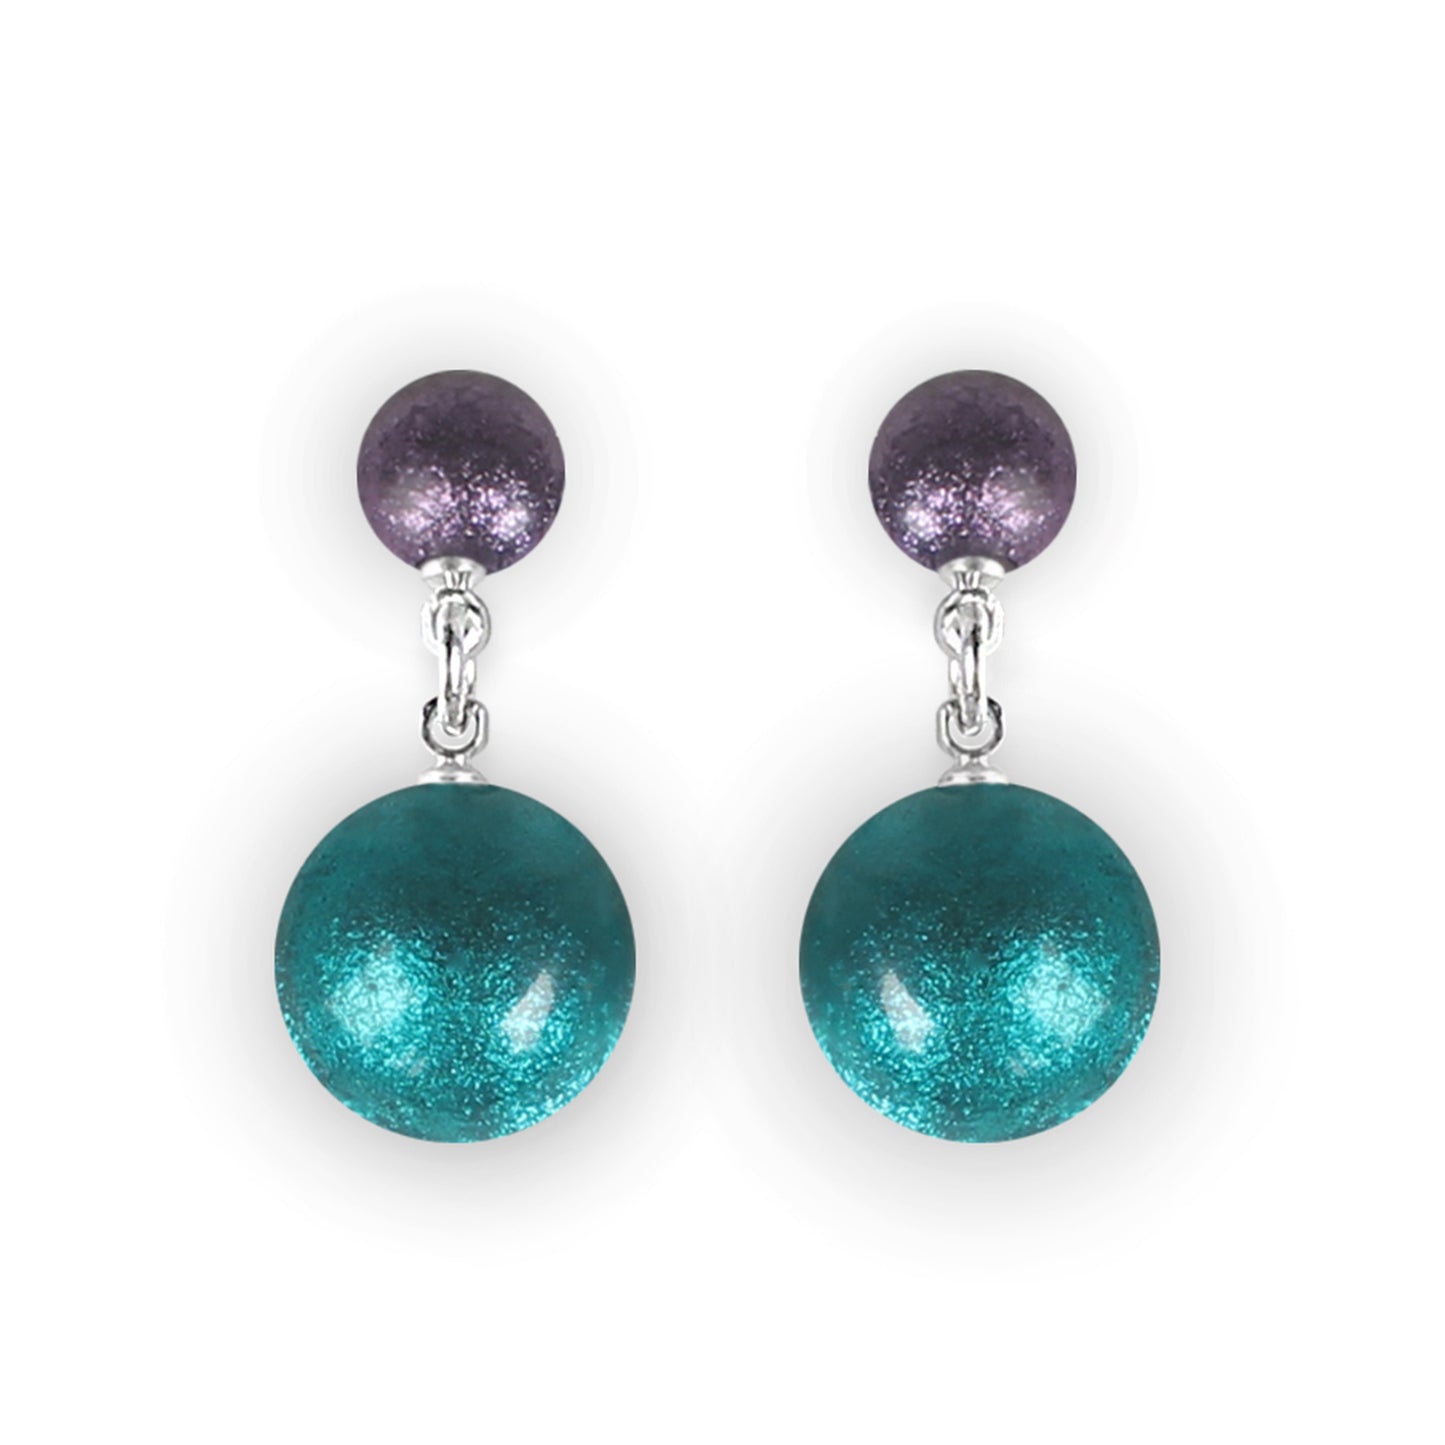 Peacock Cabouchon Shiny Double Drop Stud Earrings